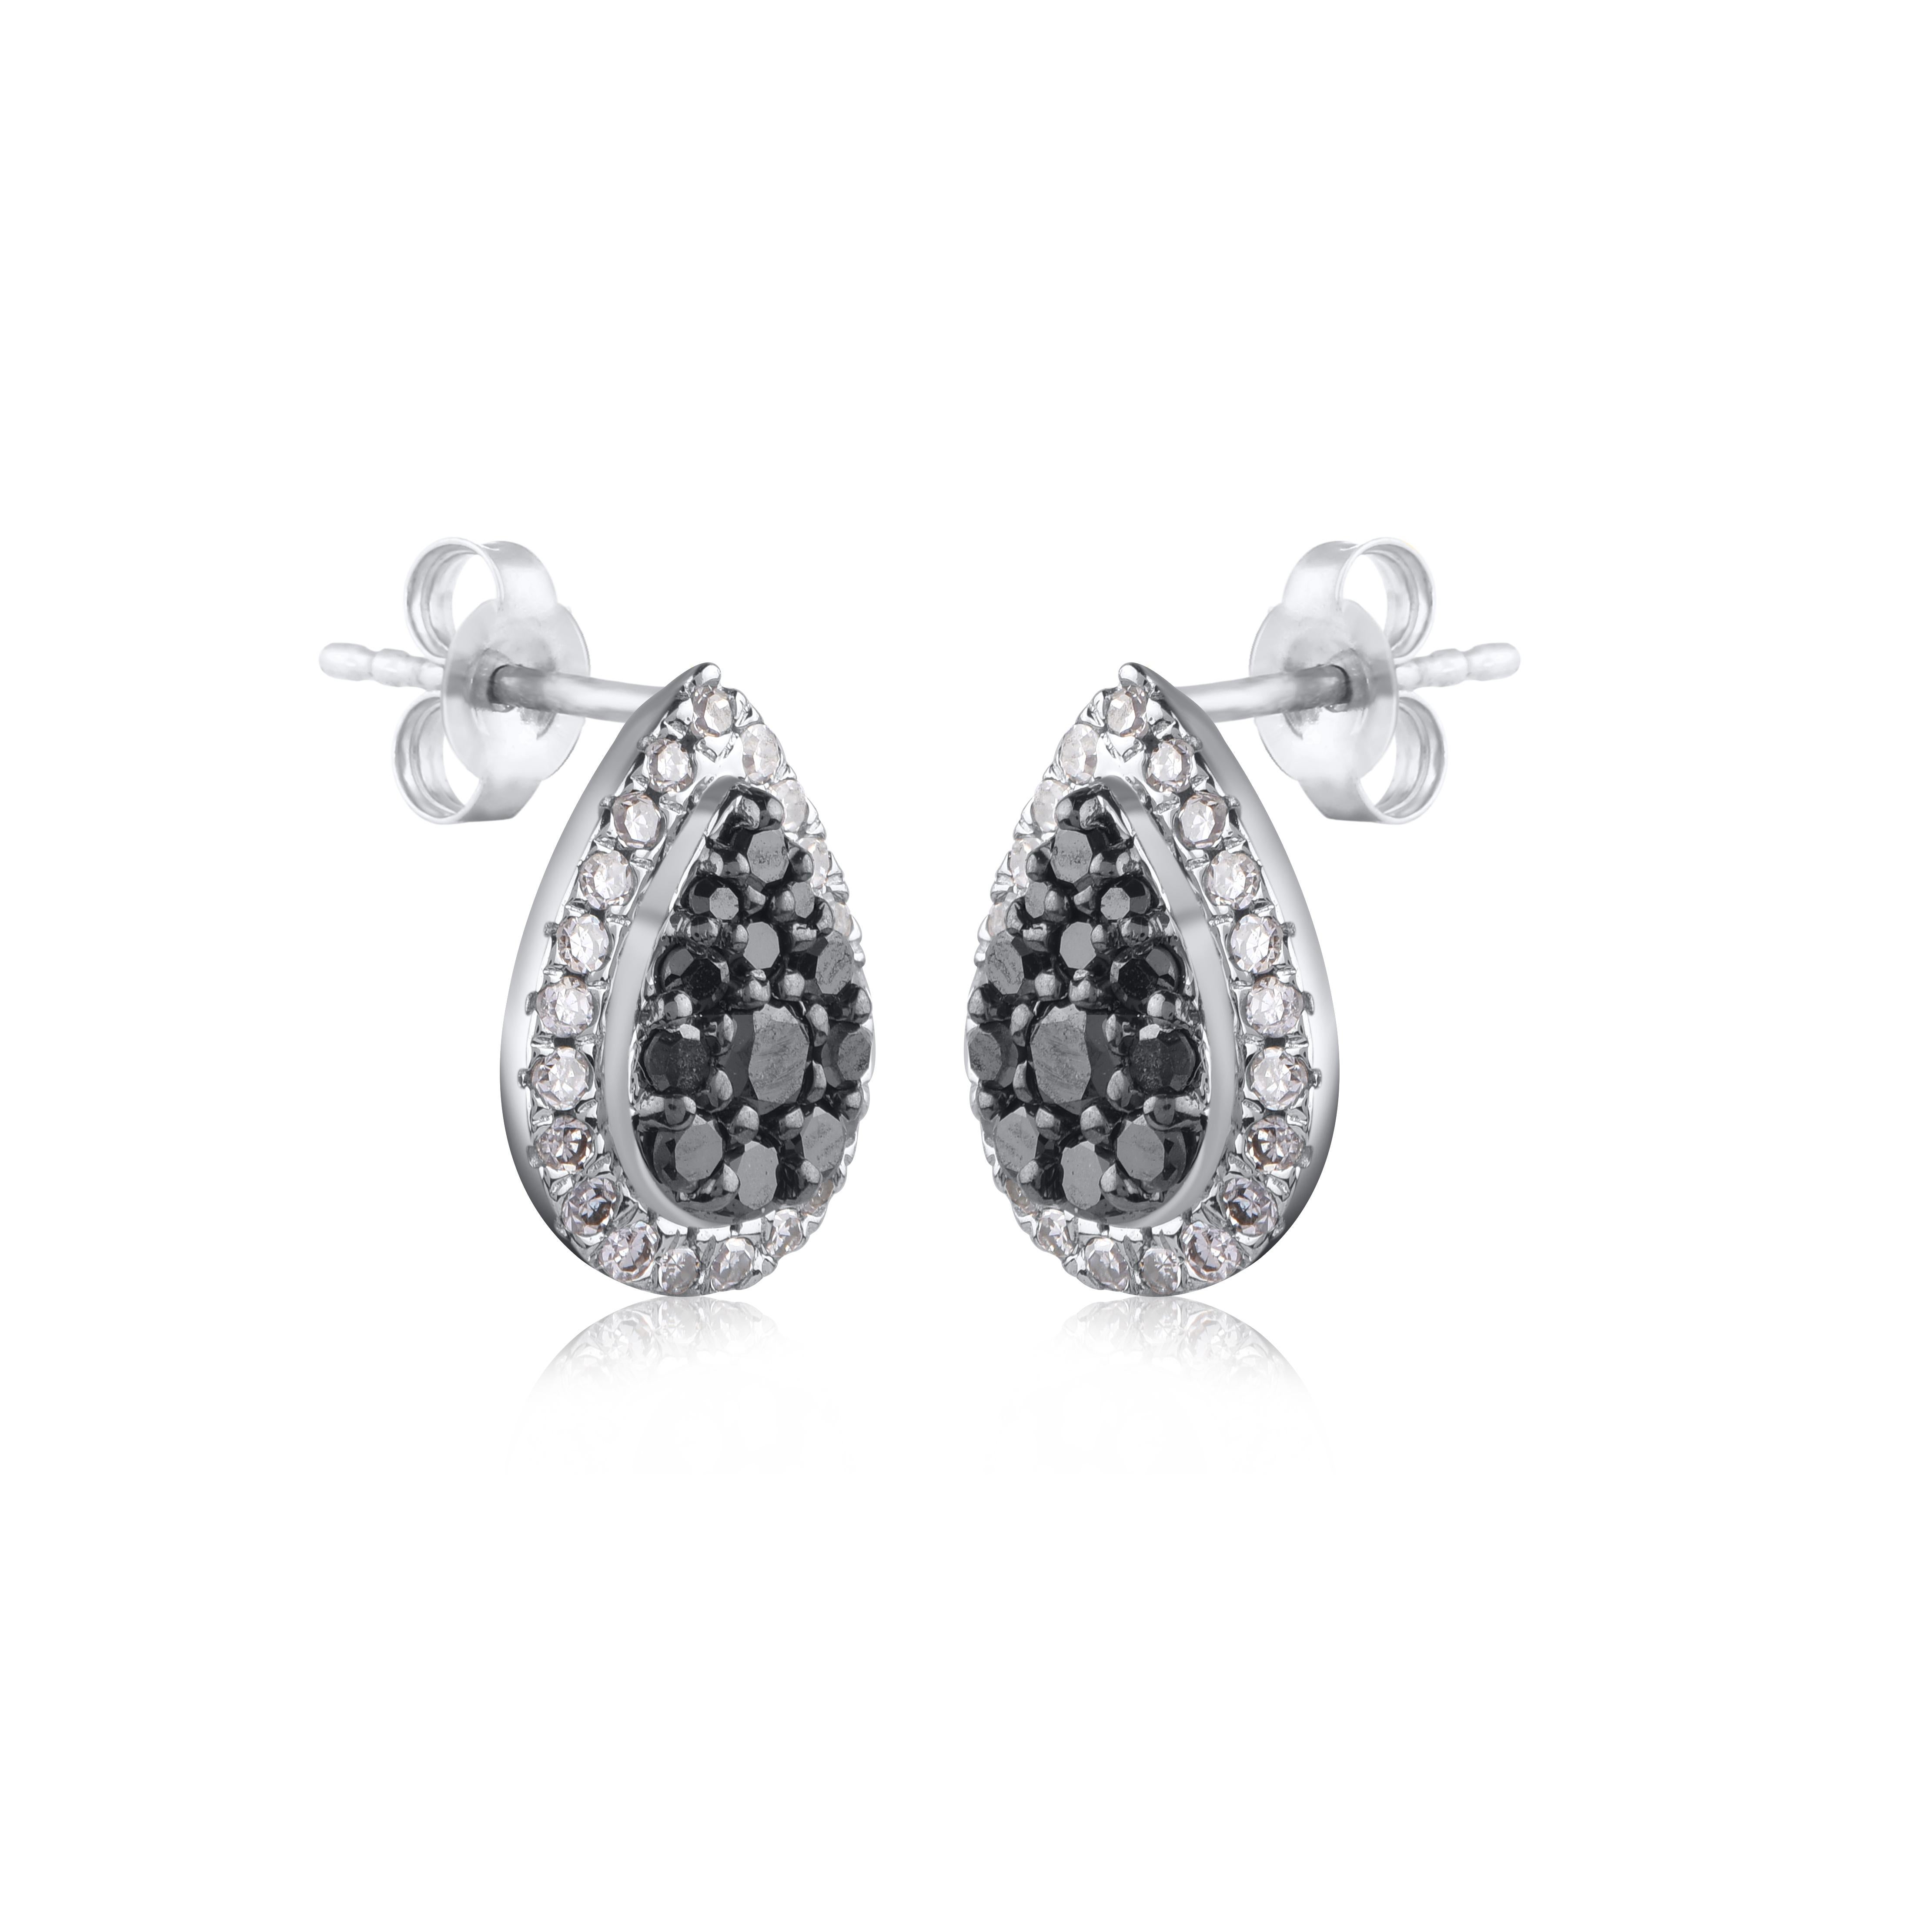 Timeless and elegant, these diamond drop stud earrings go from day to night with ease. This earring is beautifully designed and studded with 66 natural single cut round diamond and black treated diamond in prong setting. The total diamond weight is